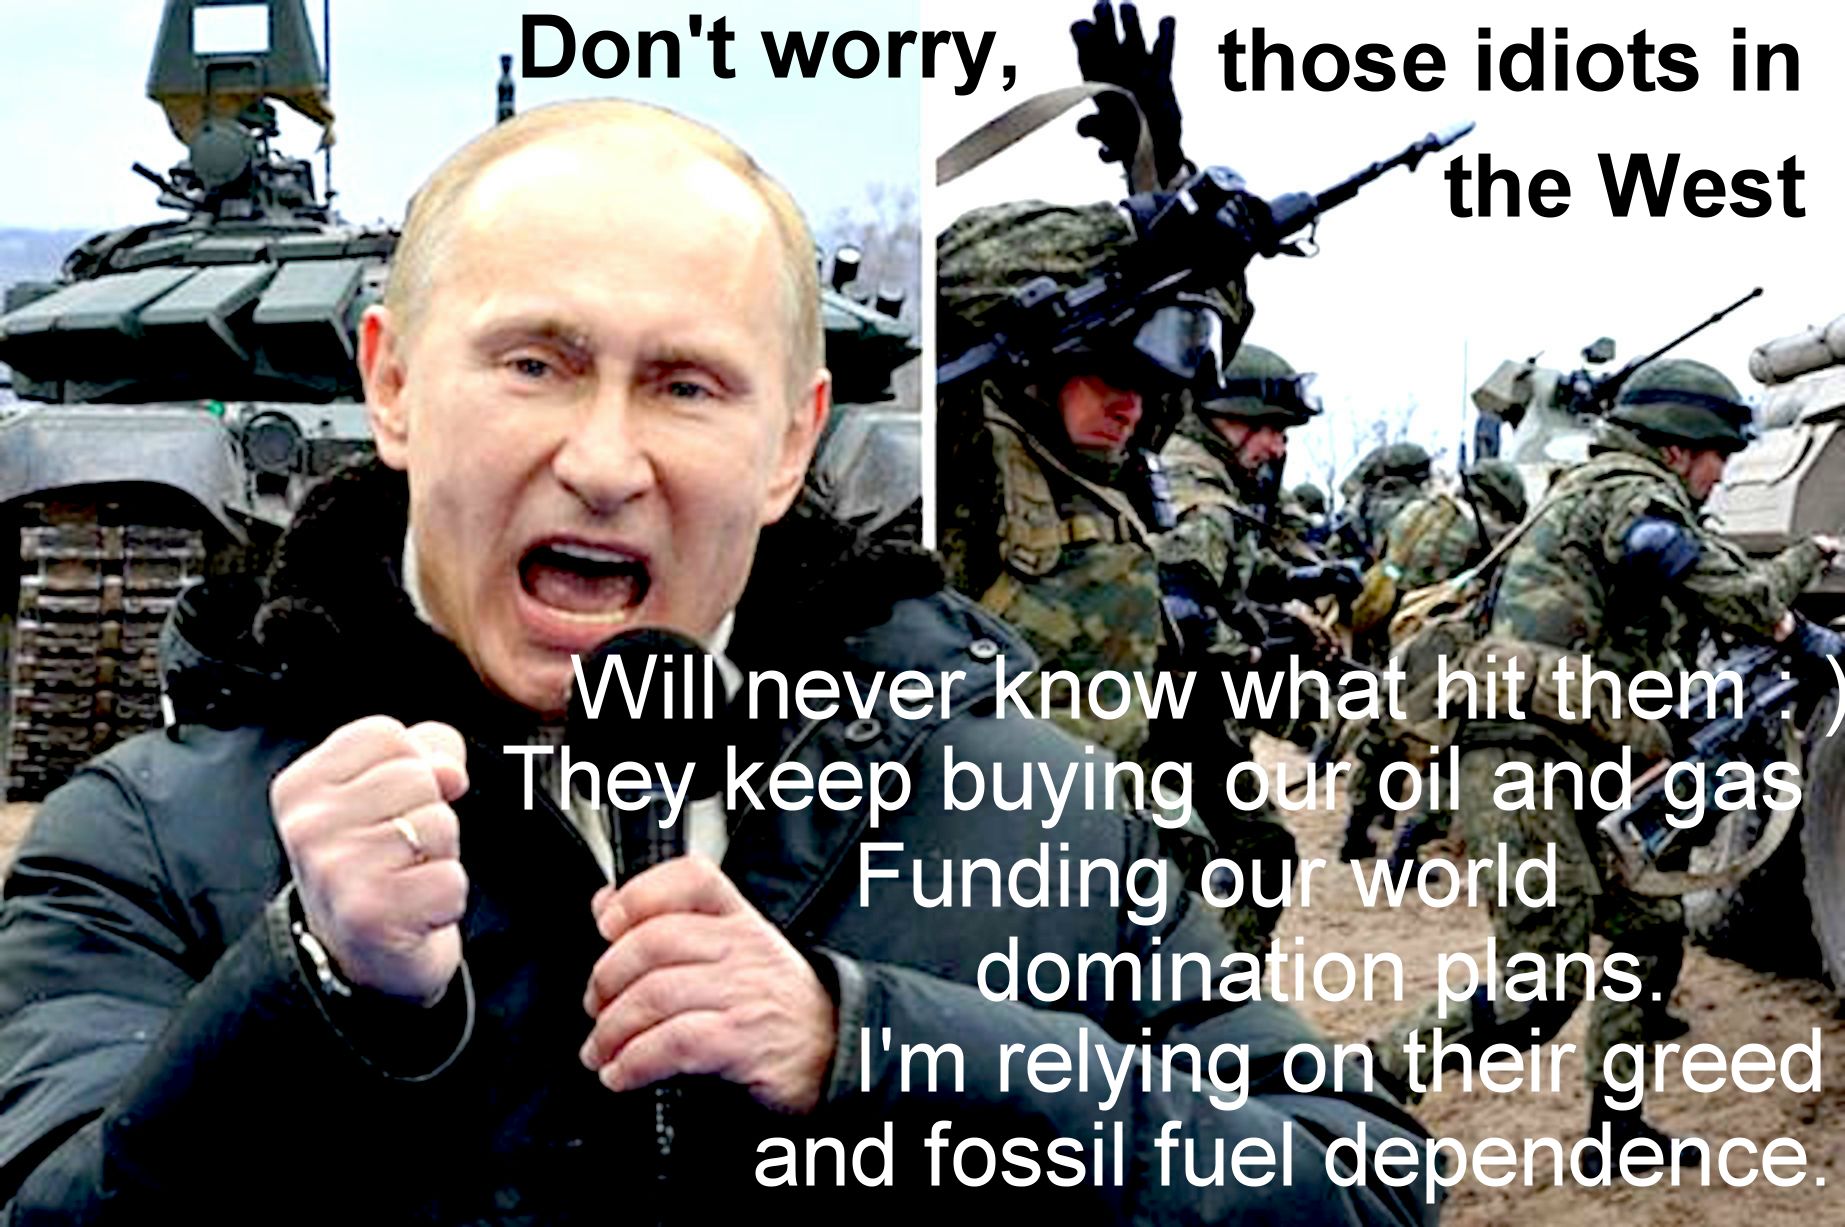 Vladimir Puting is a War Criminal, willing to risk nuclear war in his quest for world domination